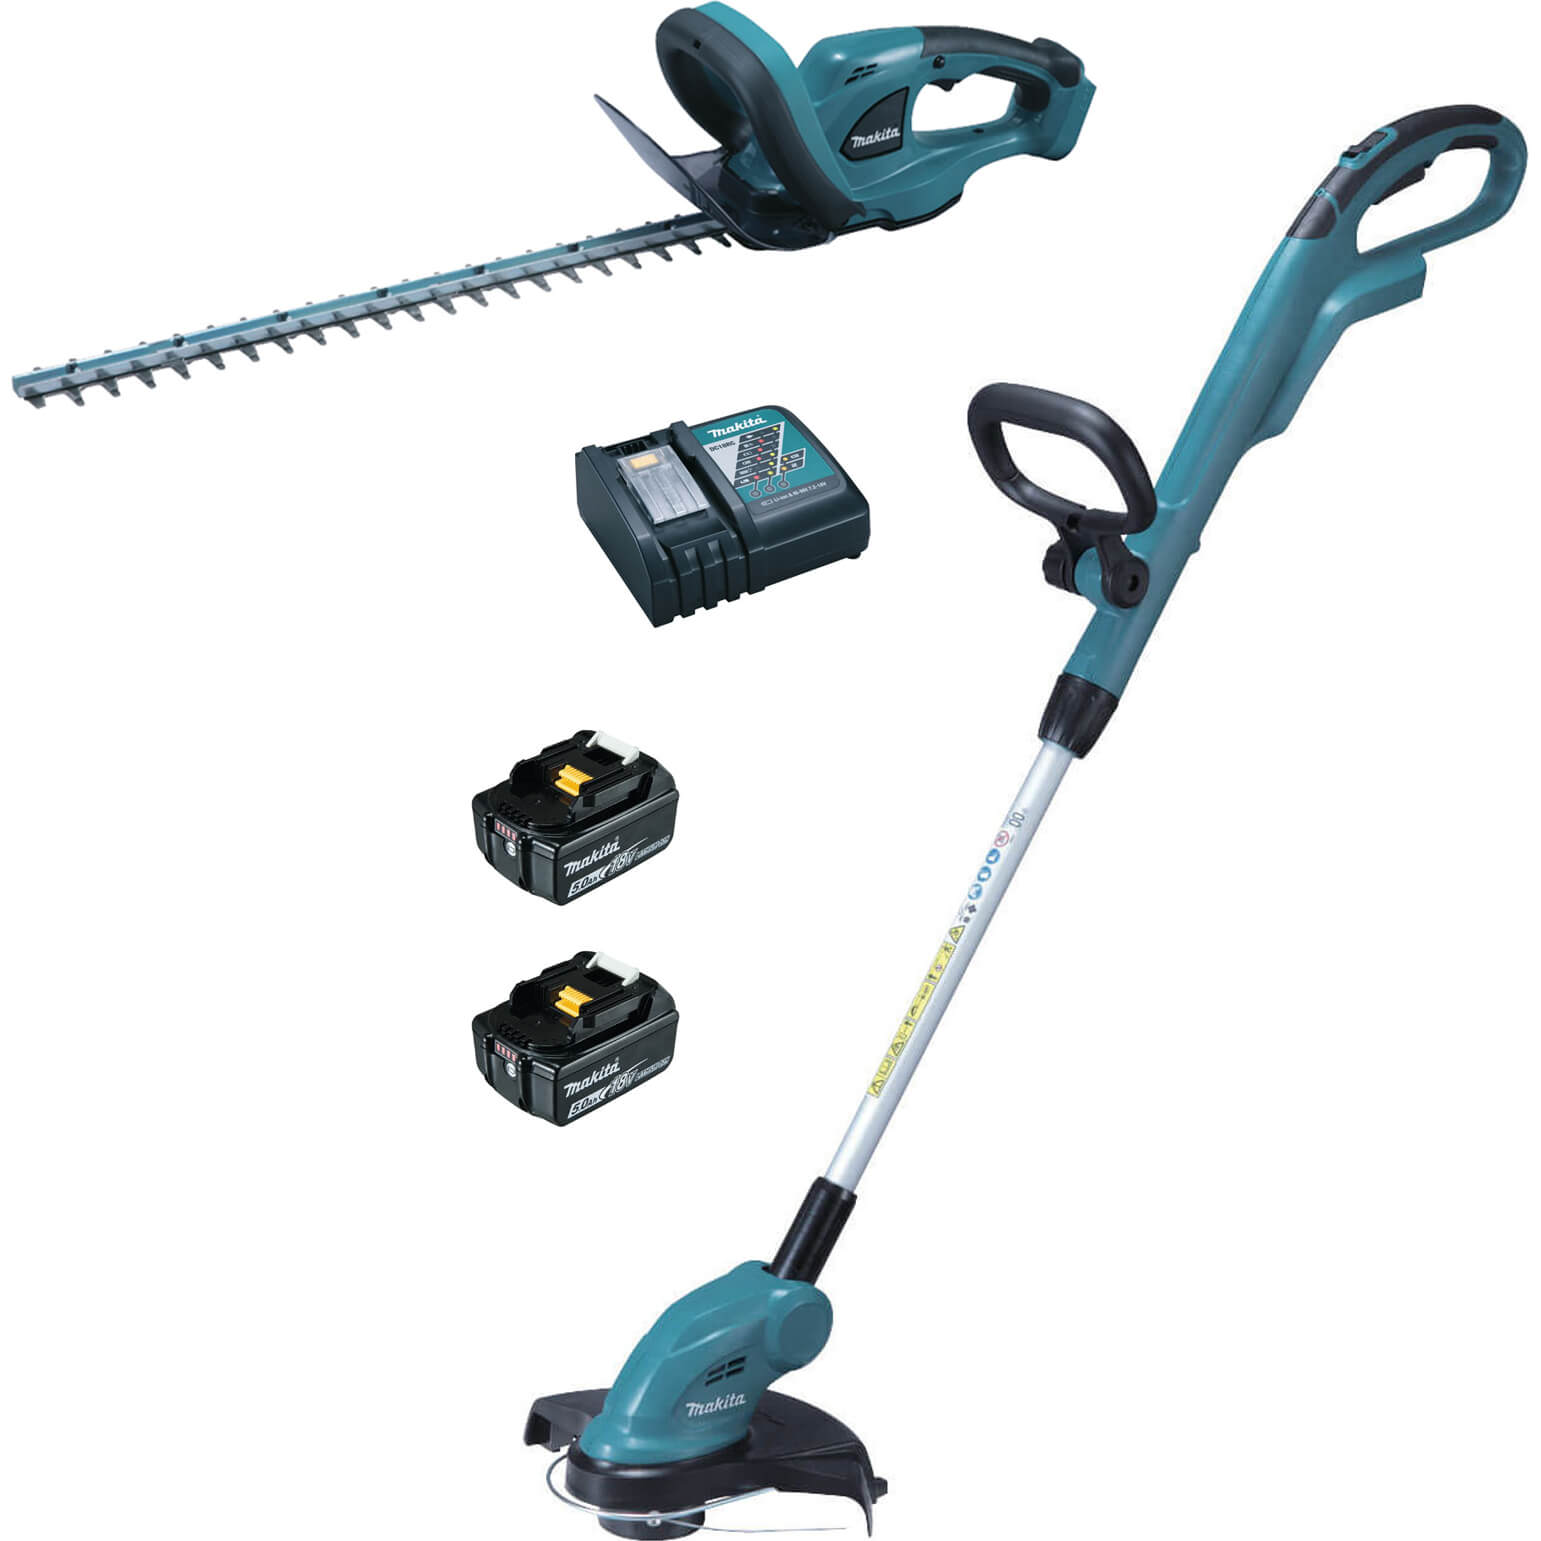 Makita 18v LXT Cordless Grass and Hedge Trimmer Kit 2 x 5ah Li-ion Charger